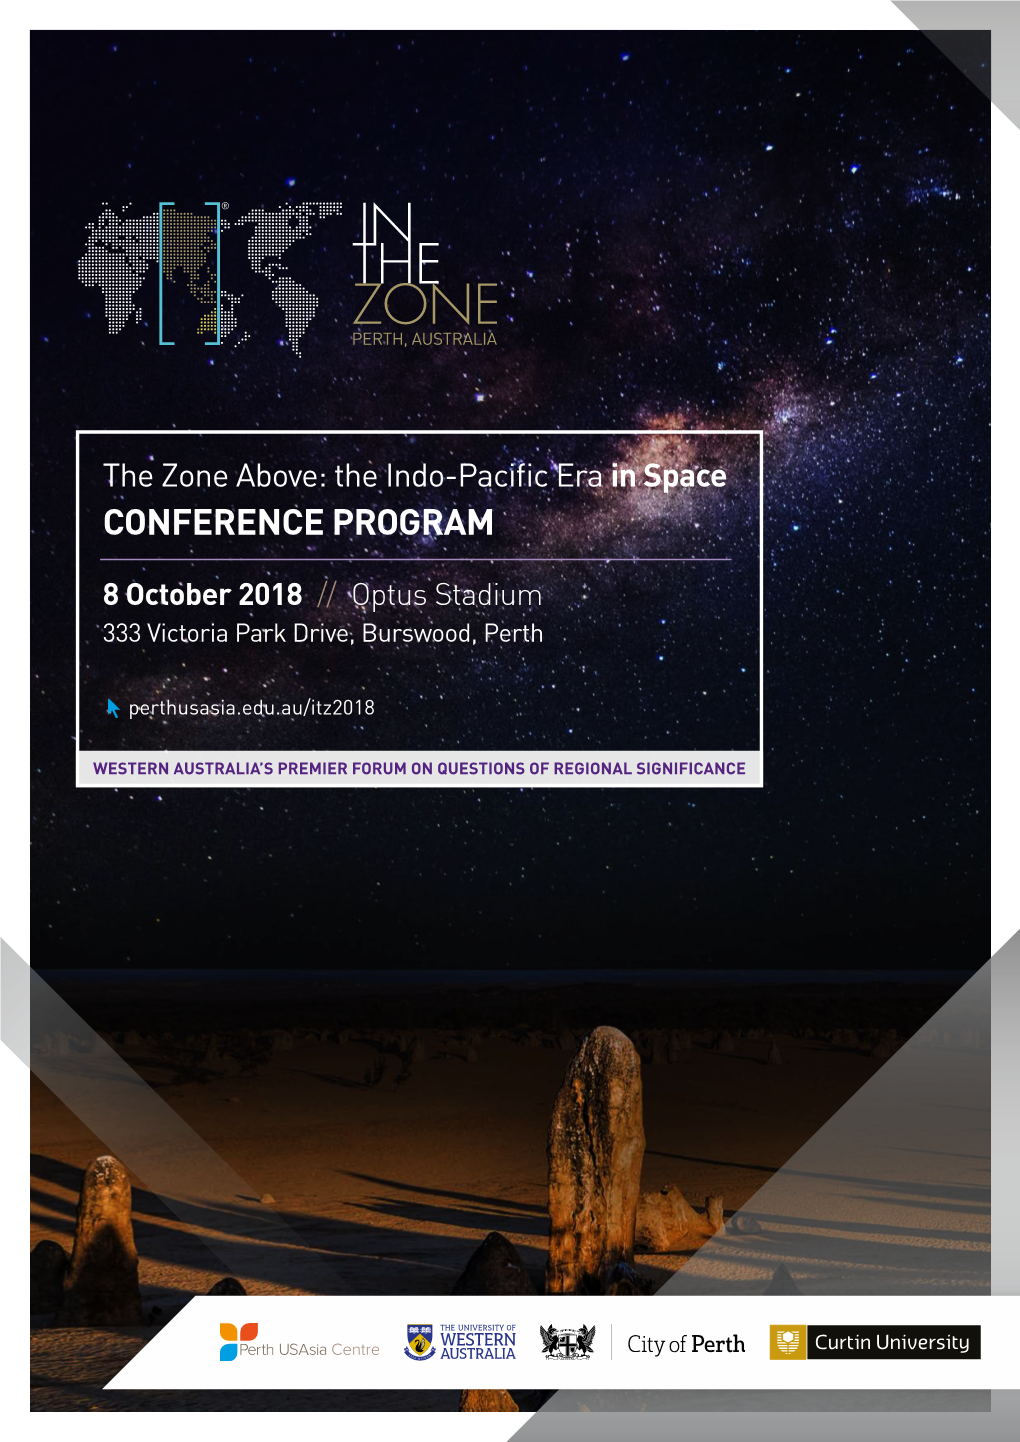 The Zone Above: the Indo-Pacific Era in Space CONFERENCE PROGRAM